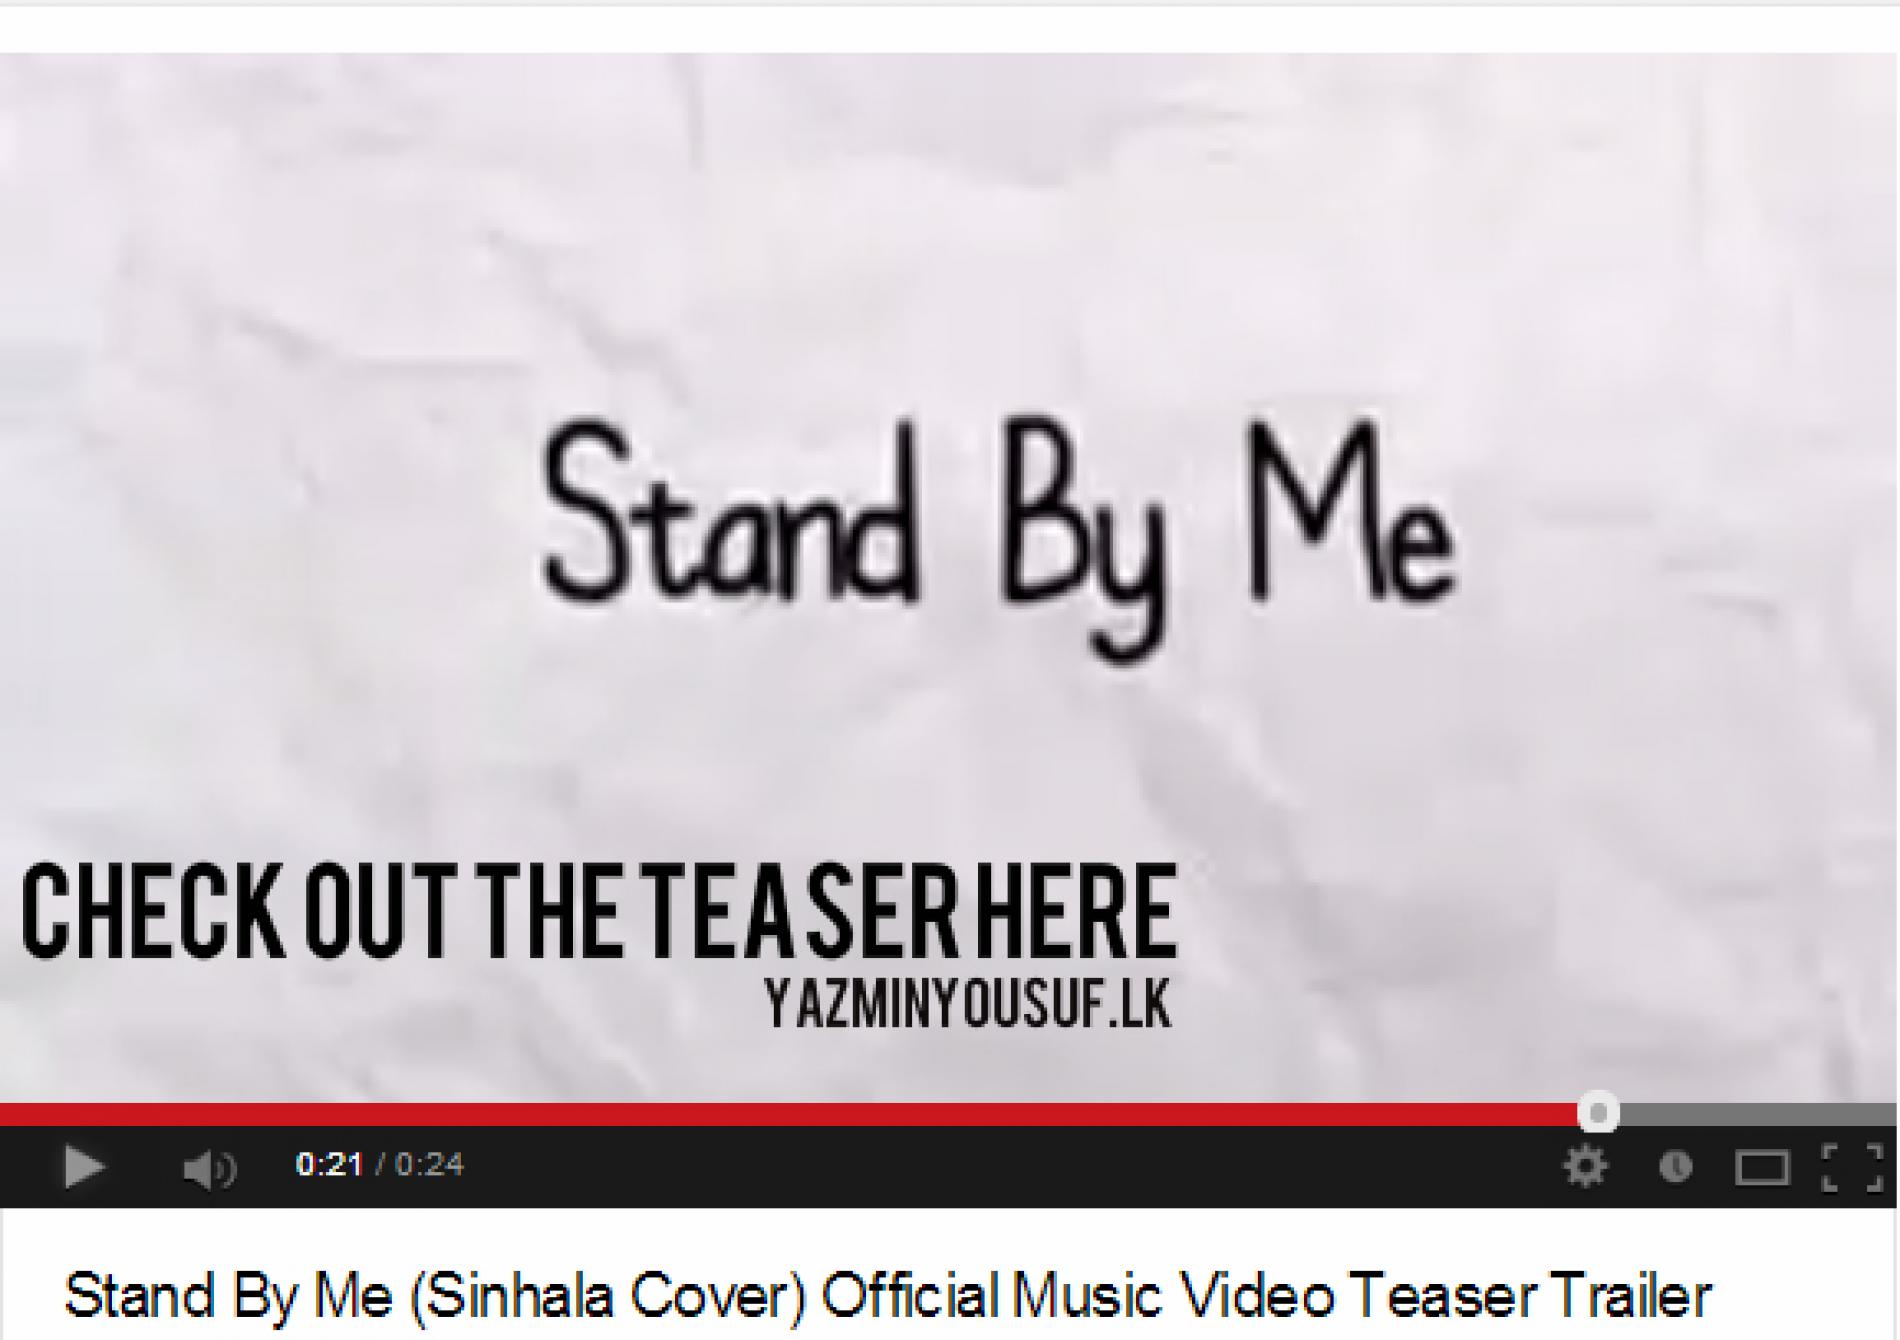 Stand By Me (Sinhala Cover) Official Music Video Teaser Trailer